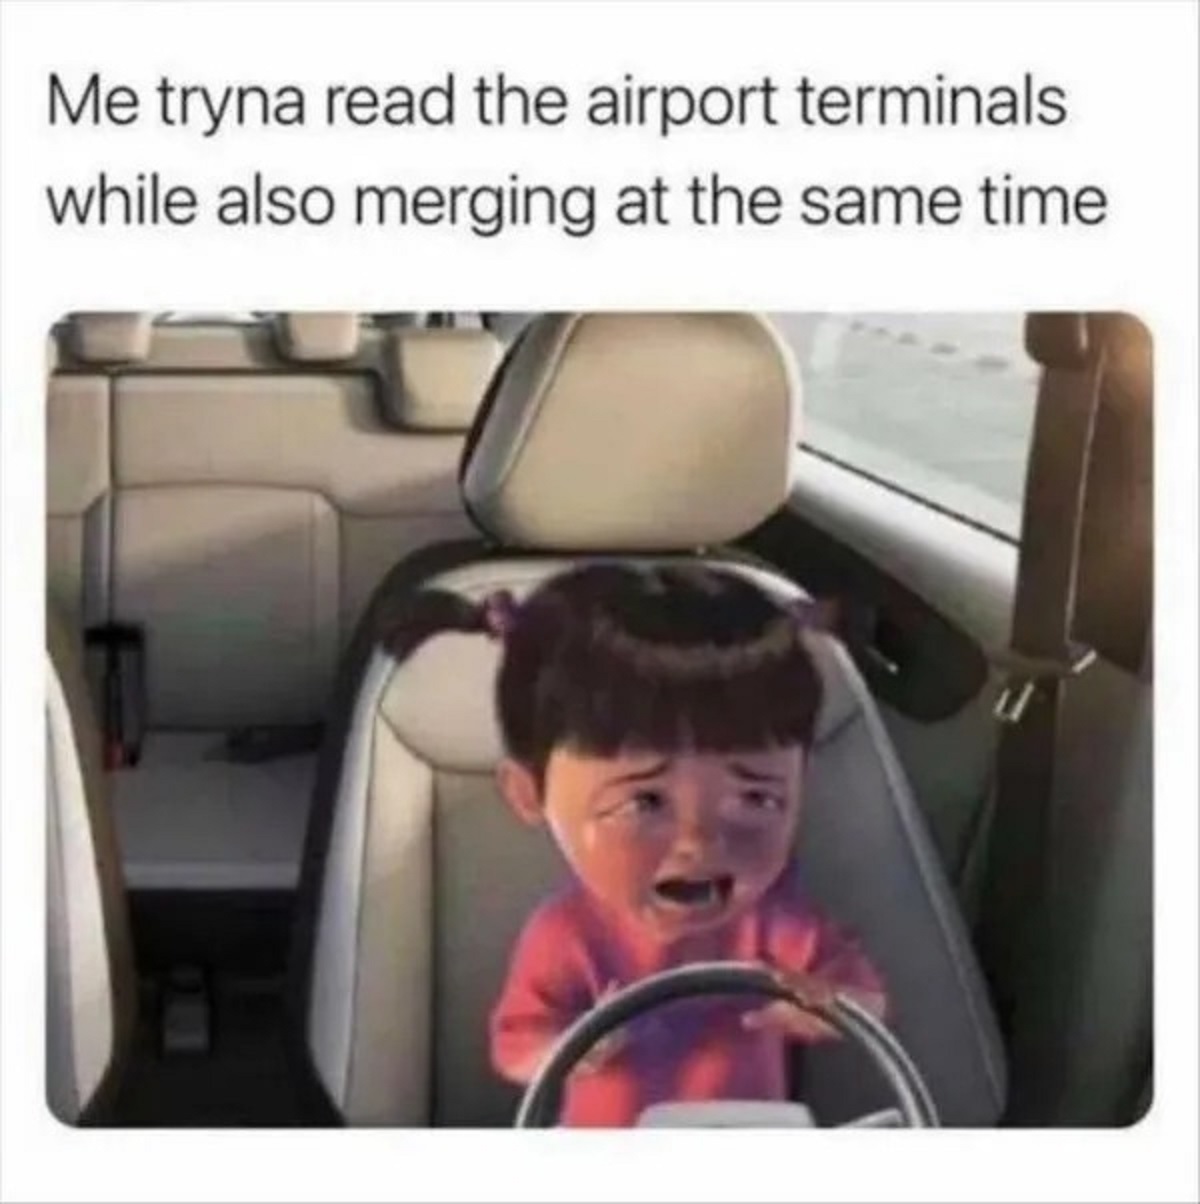 its raining and you cant see - Me tryna read the airport terminals while also merging at the same time